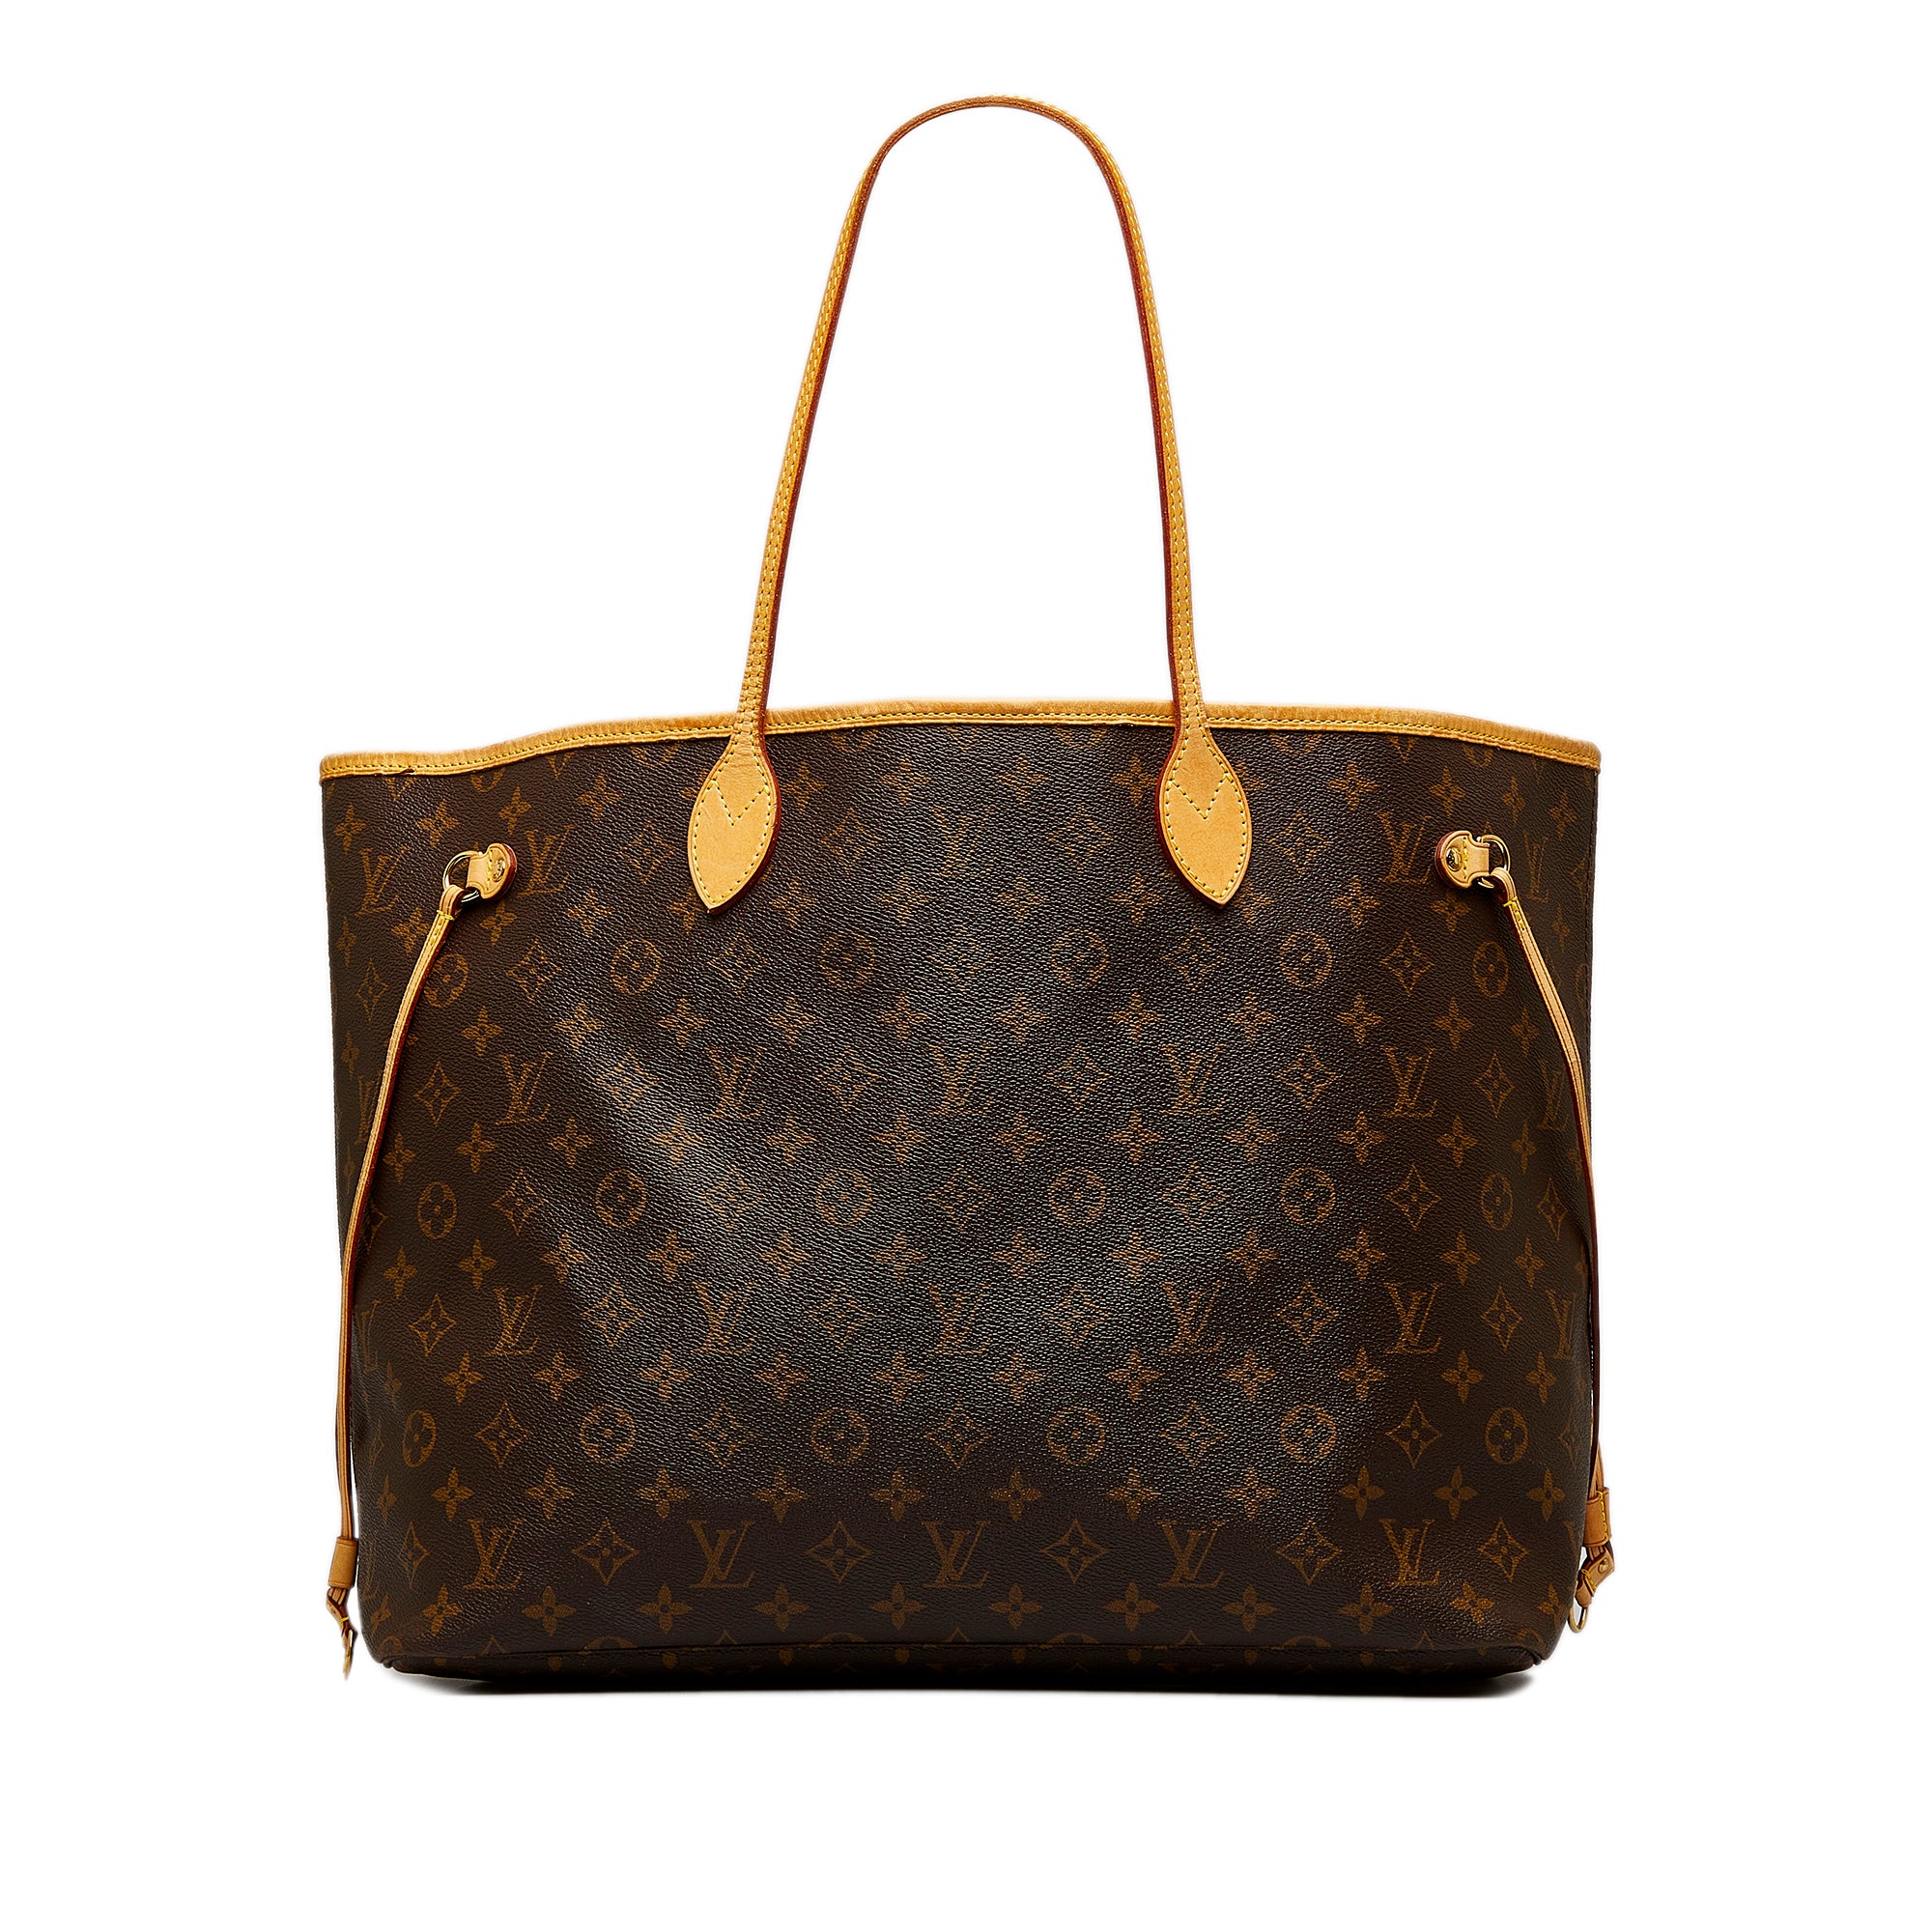 Louis Vuitton - Authenticated Neverfull Handbag - Cloth Brown For Woman, Good condition